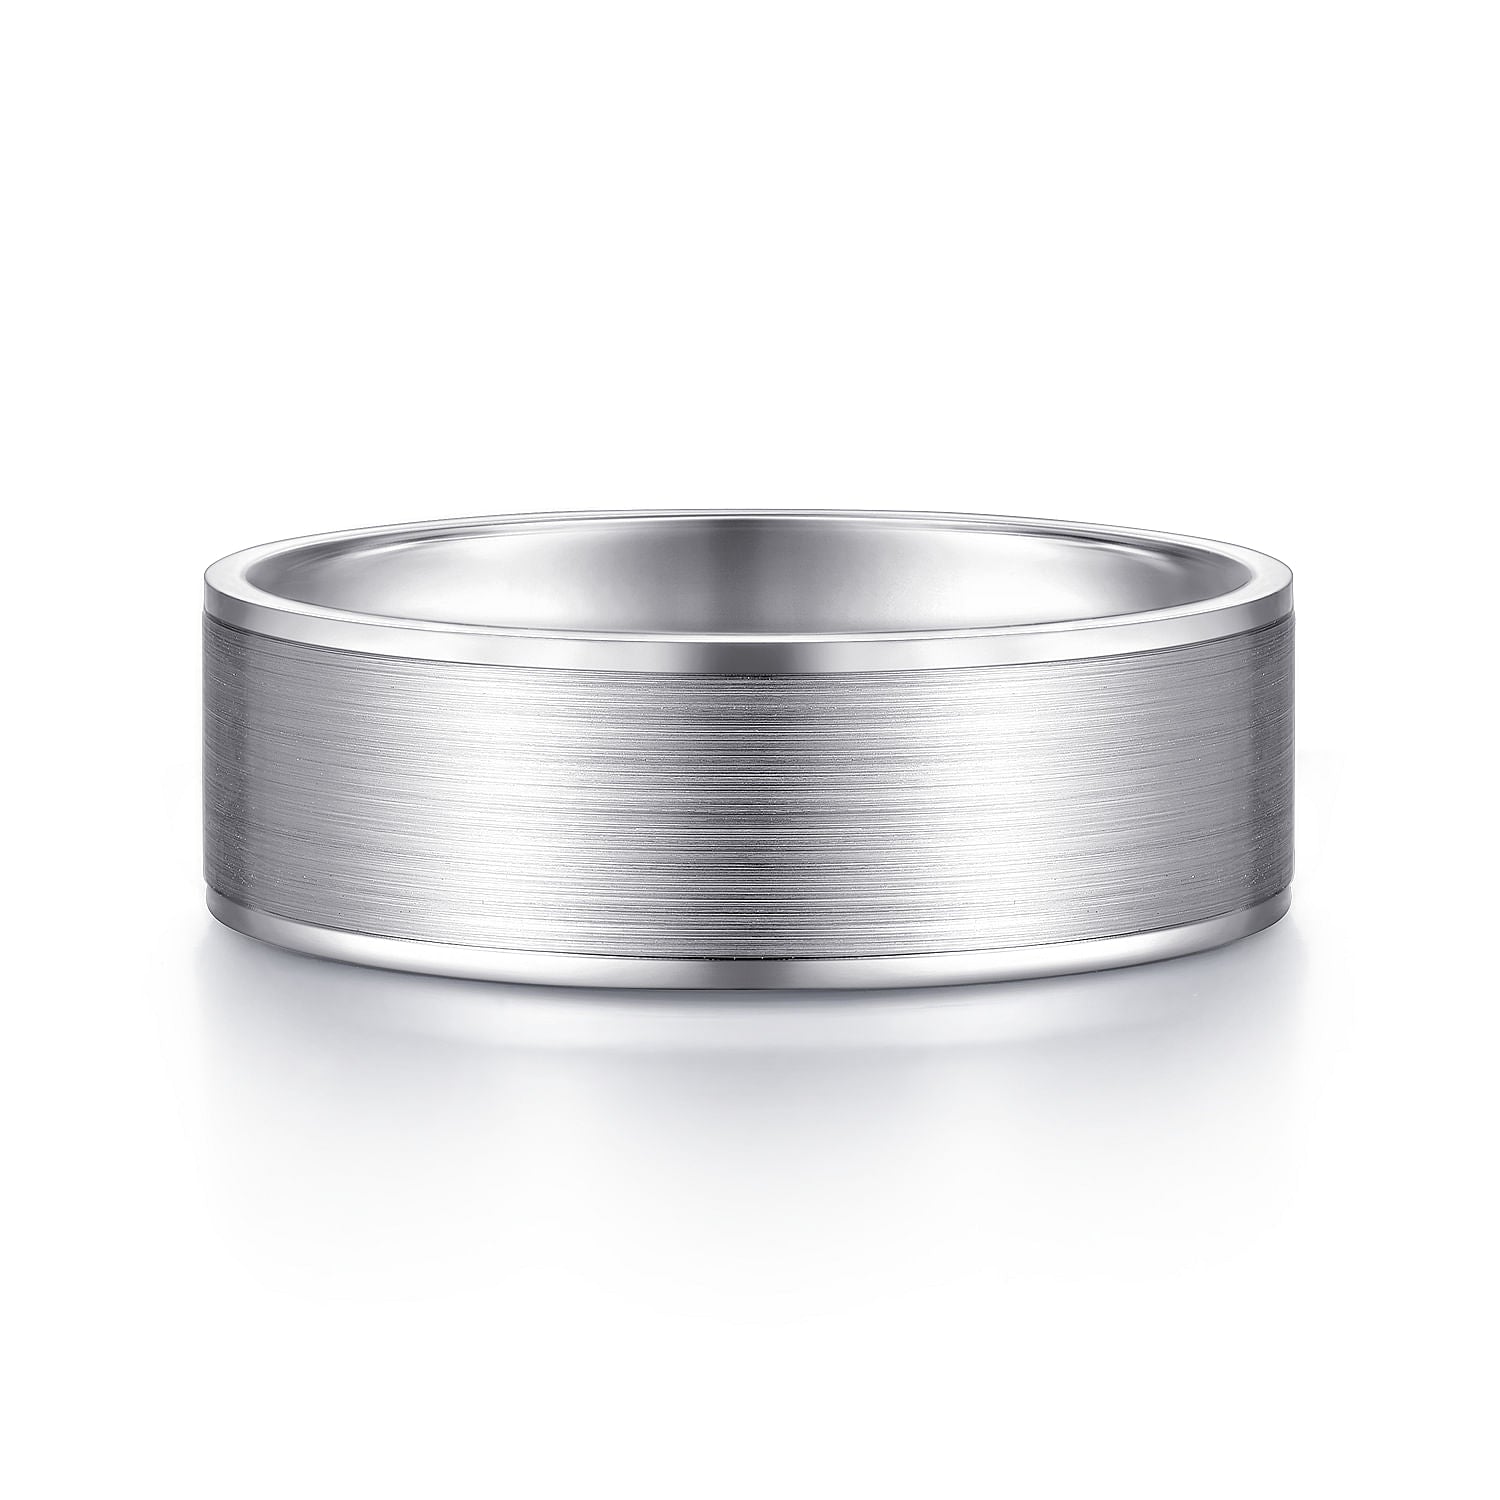 Gabriel & Co White Gold Wedding Band With A Satin Center And Polished Beveled Edges - Gold Wedding Bands - Men's